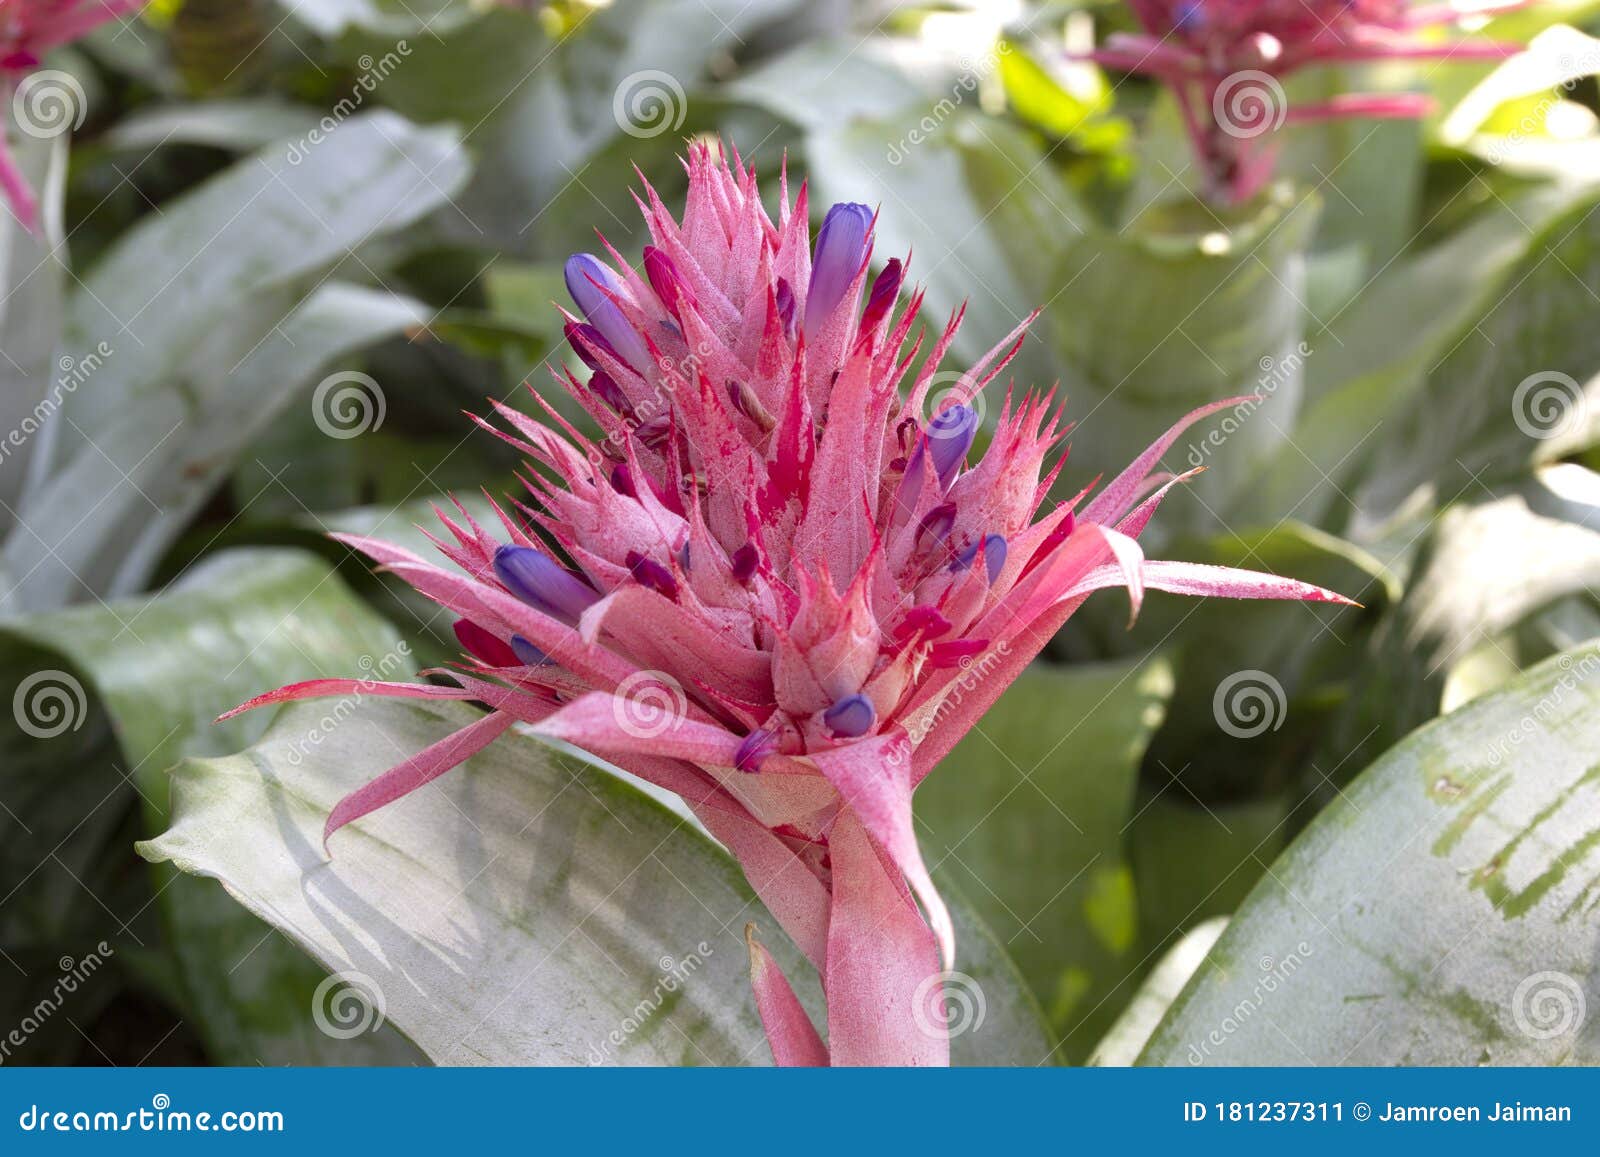 Blooming Aechmea Fasciata Silver Vase Or Urn Plant Is A Species Of Flowering Plant In The Bromeliad Family Stock Image Image Of Floral Bloom 181237311